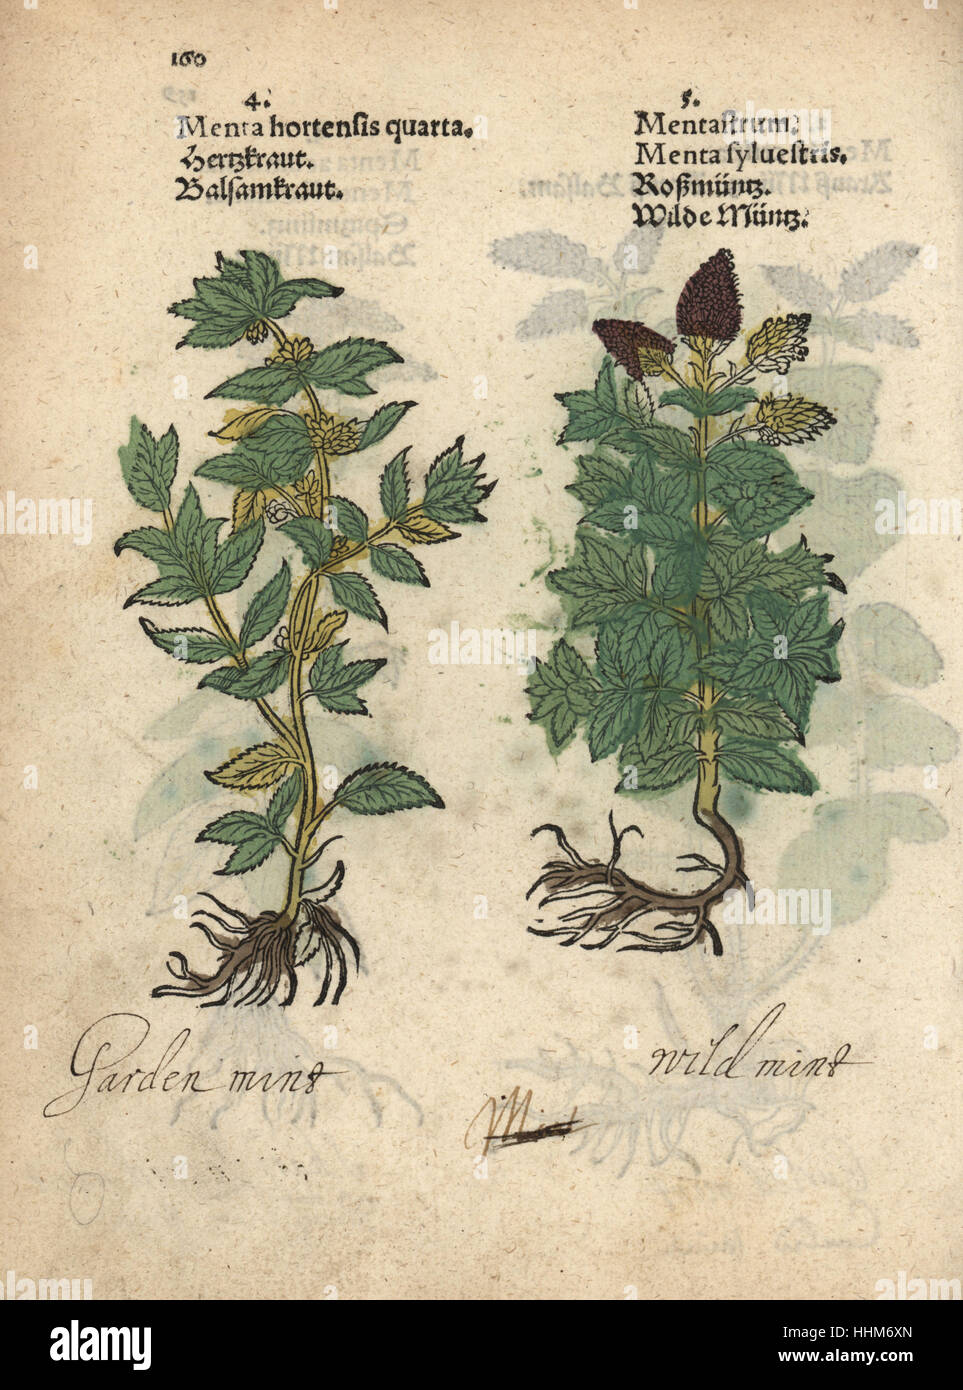 Mint, Mentha x gracilis, and horse mint, Mentha longifolia. Handcoloured woodblock engraving of a botanical illustration from Adam Lonicer's Krauterbuch, or Herbal, Frankfurt, 1557. This from a 17th century pirate edition or atlas of illustrations only, with captions in Latin, Greek, French, Italian, German, and in English manuscript. Stock Photo